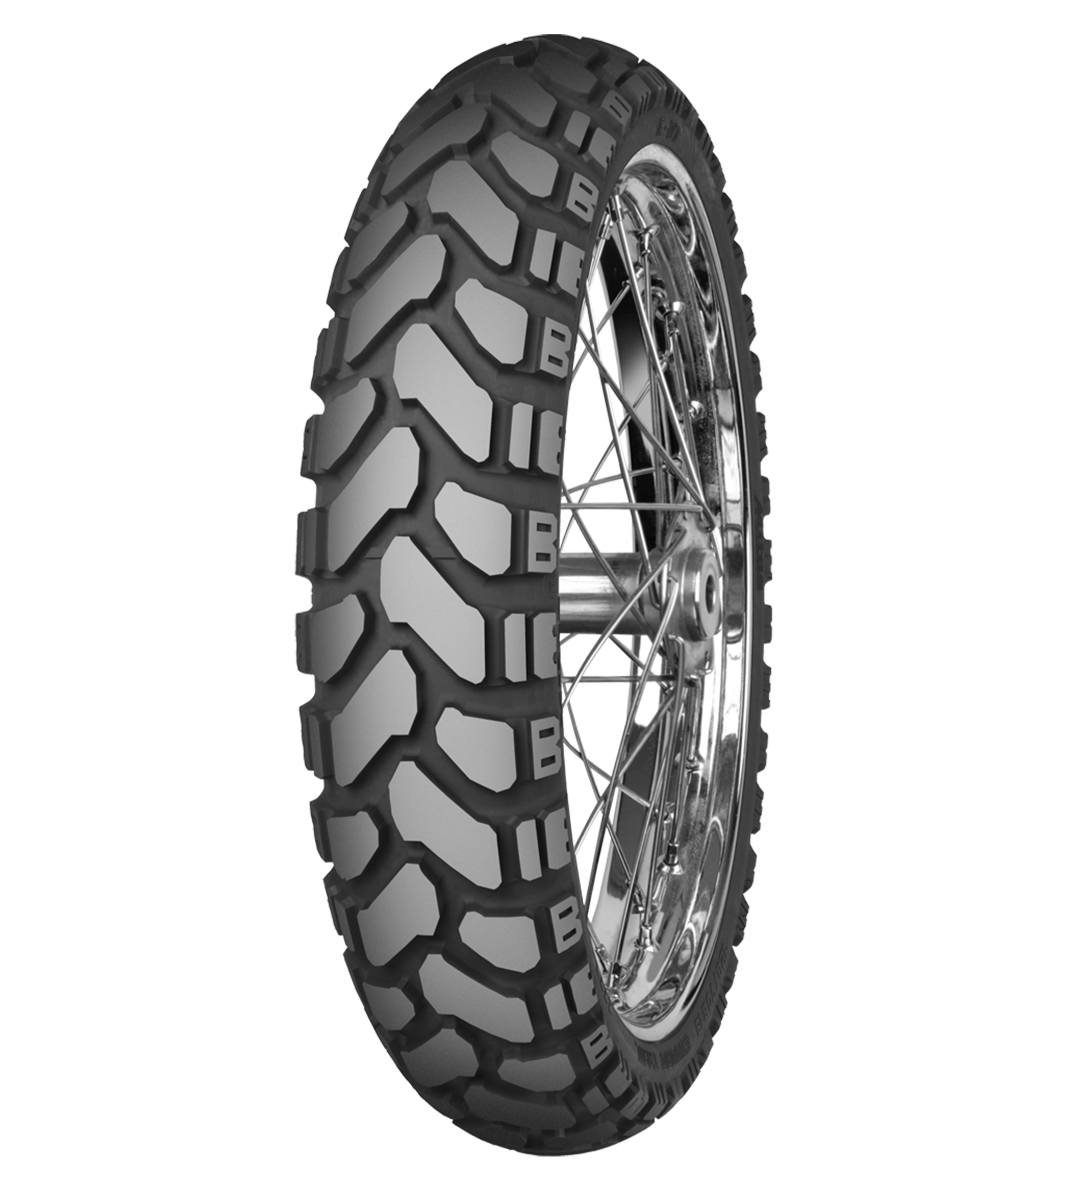 Mitas E-07+ ENDURO TRAIL 90/90B21 Trail ON Trail 54T No Stripe Tubeless Front Tire, 224654, 90/90B21, Adventure Touring, E Series, E-07+ Enduro Trail, Front, Trail, Trail ON, Tires - Imported and distributed in North &amp; South America by Lindeco Genuine Powersports - Premier Powersports Equipment and Accessories for Motorcycle Enthusiasts, Professional Riders and Dealers.